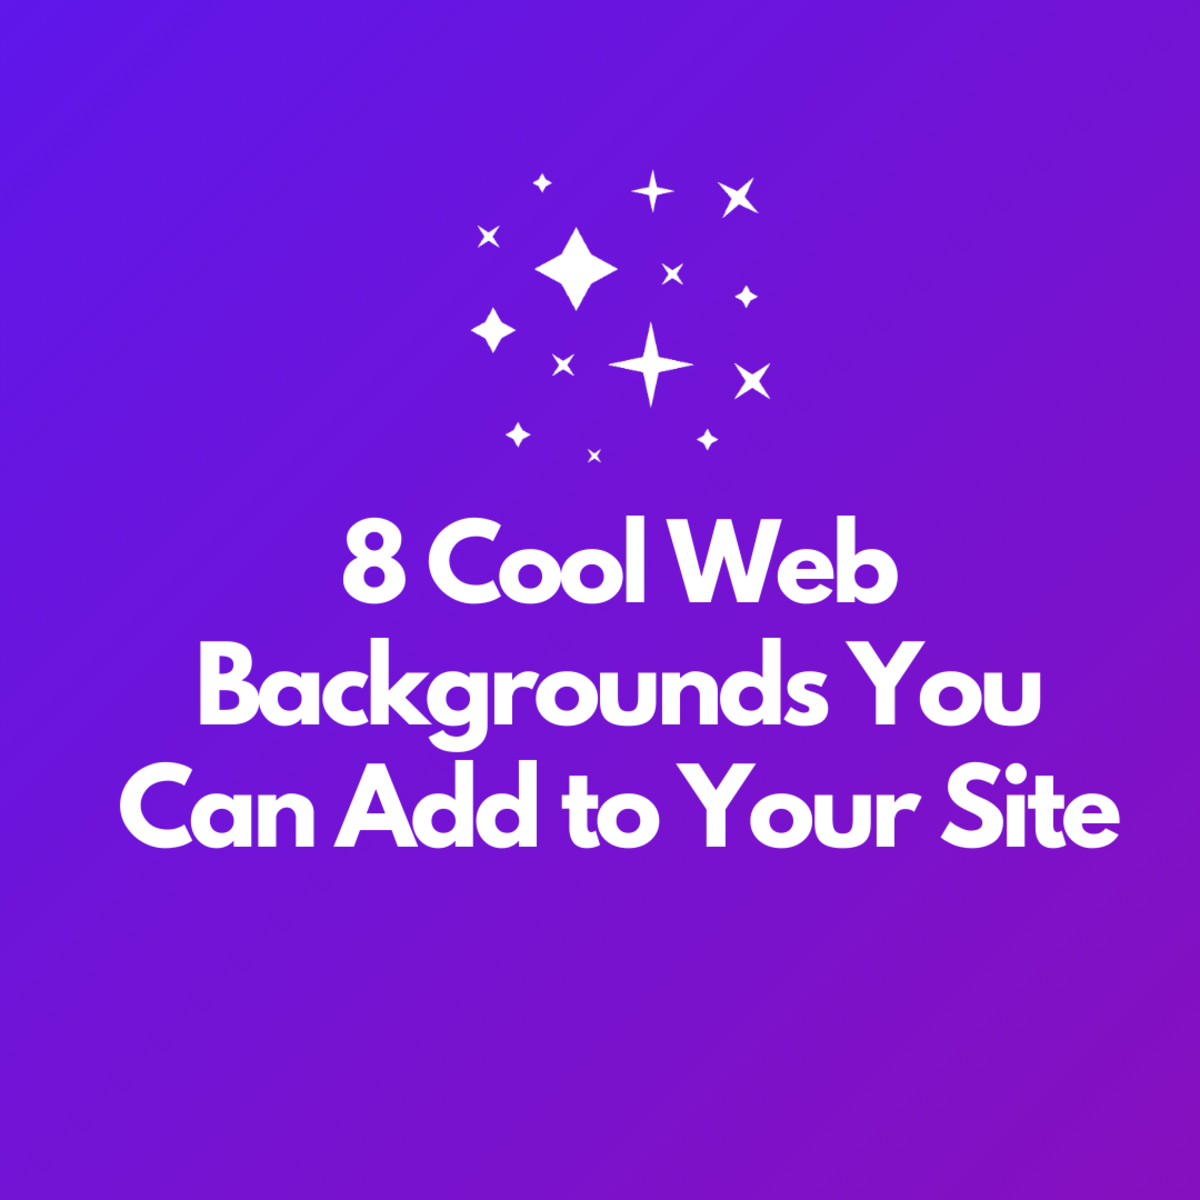 8 Cool Web Backgrounds You Can Add to Your Site